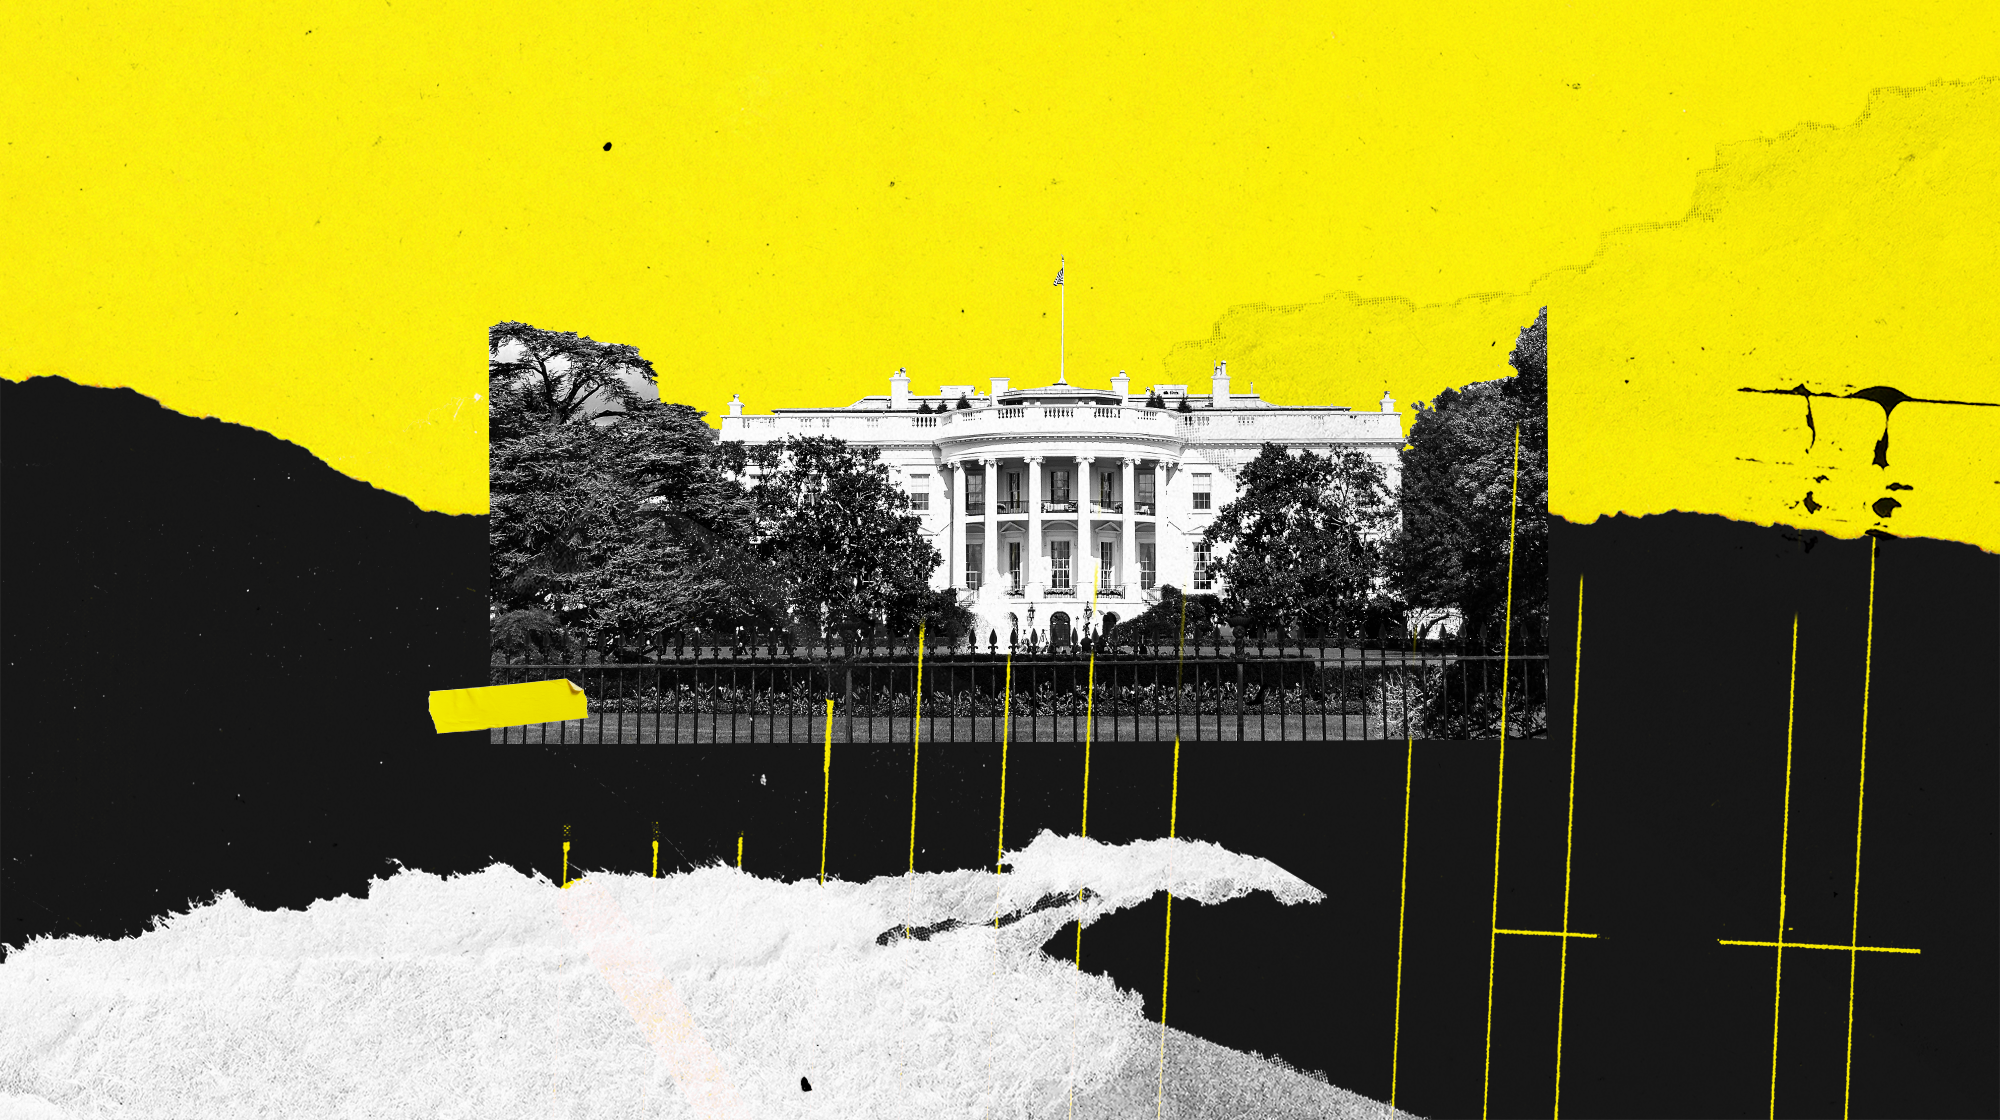 An illustration of the White House and black and yellow jagged shapes.